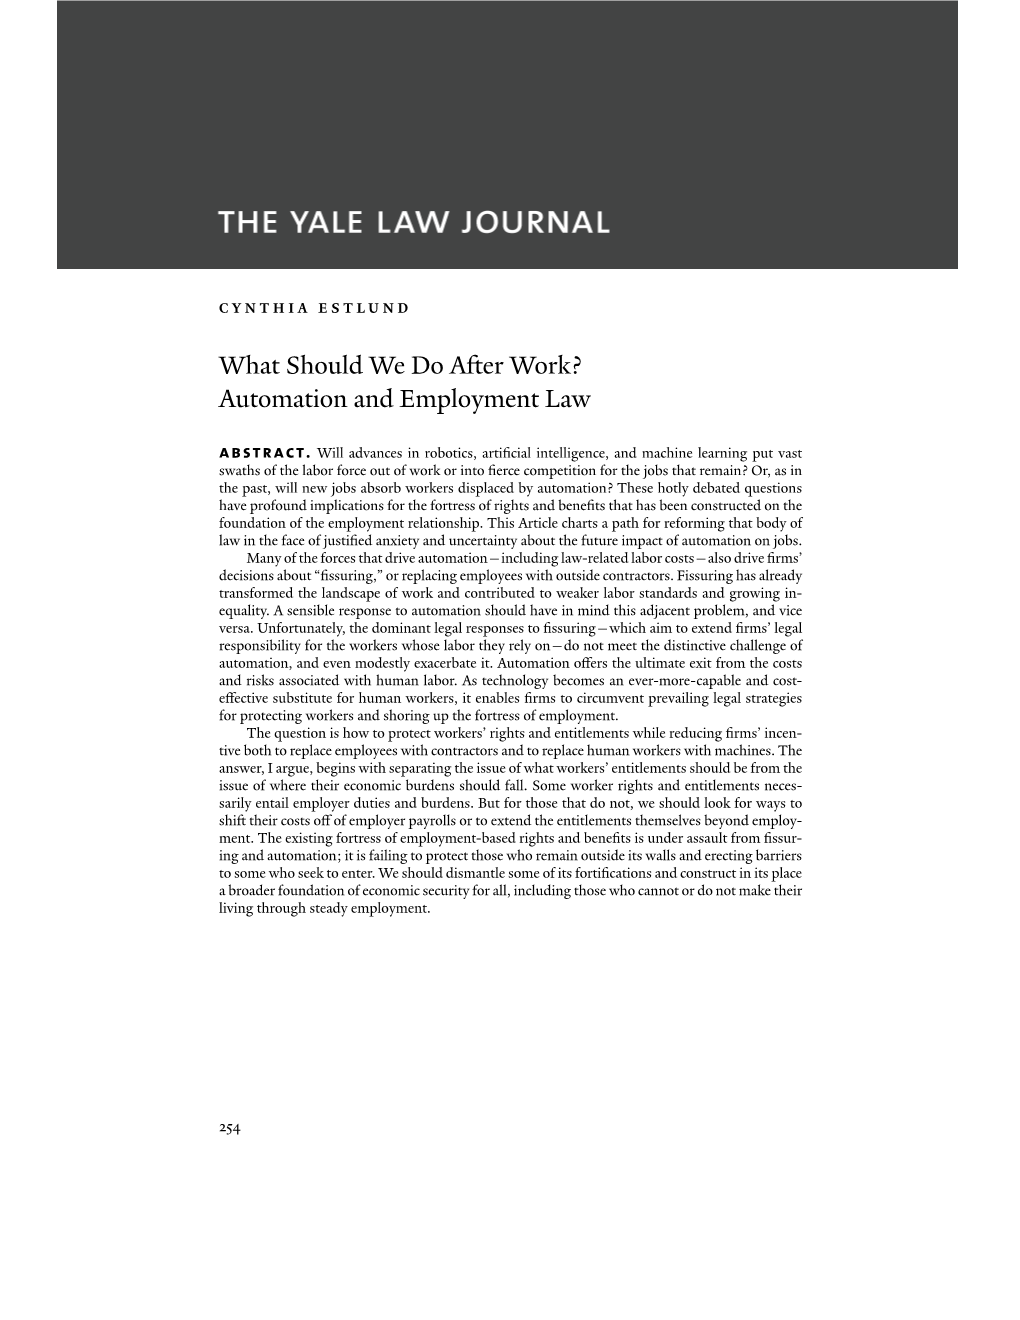 What Should We Do After Work? Automation and Employment Law Abstract